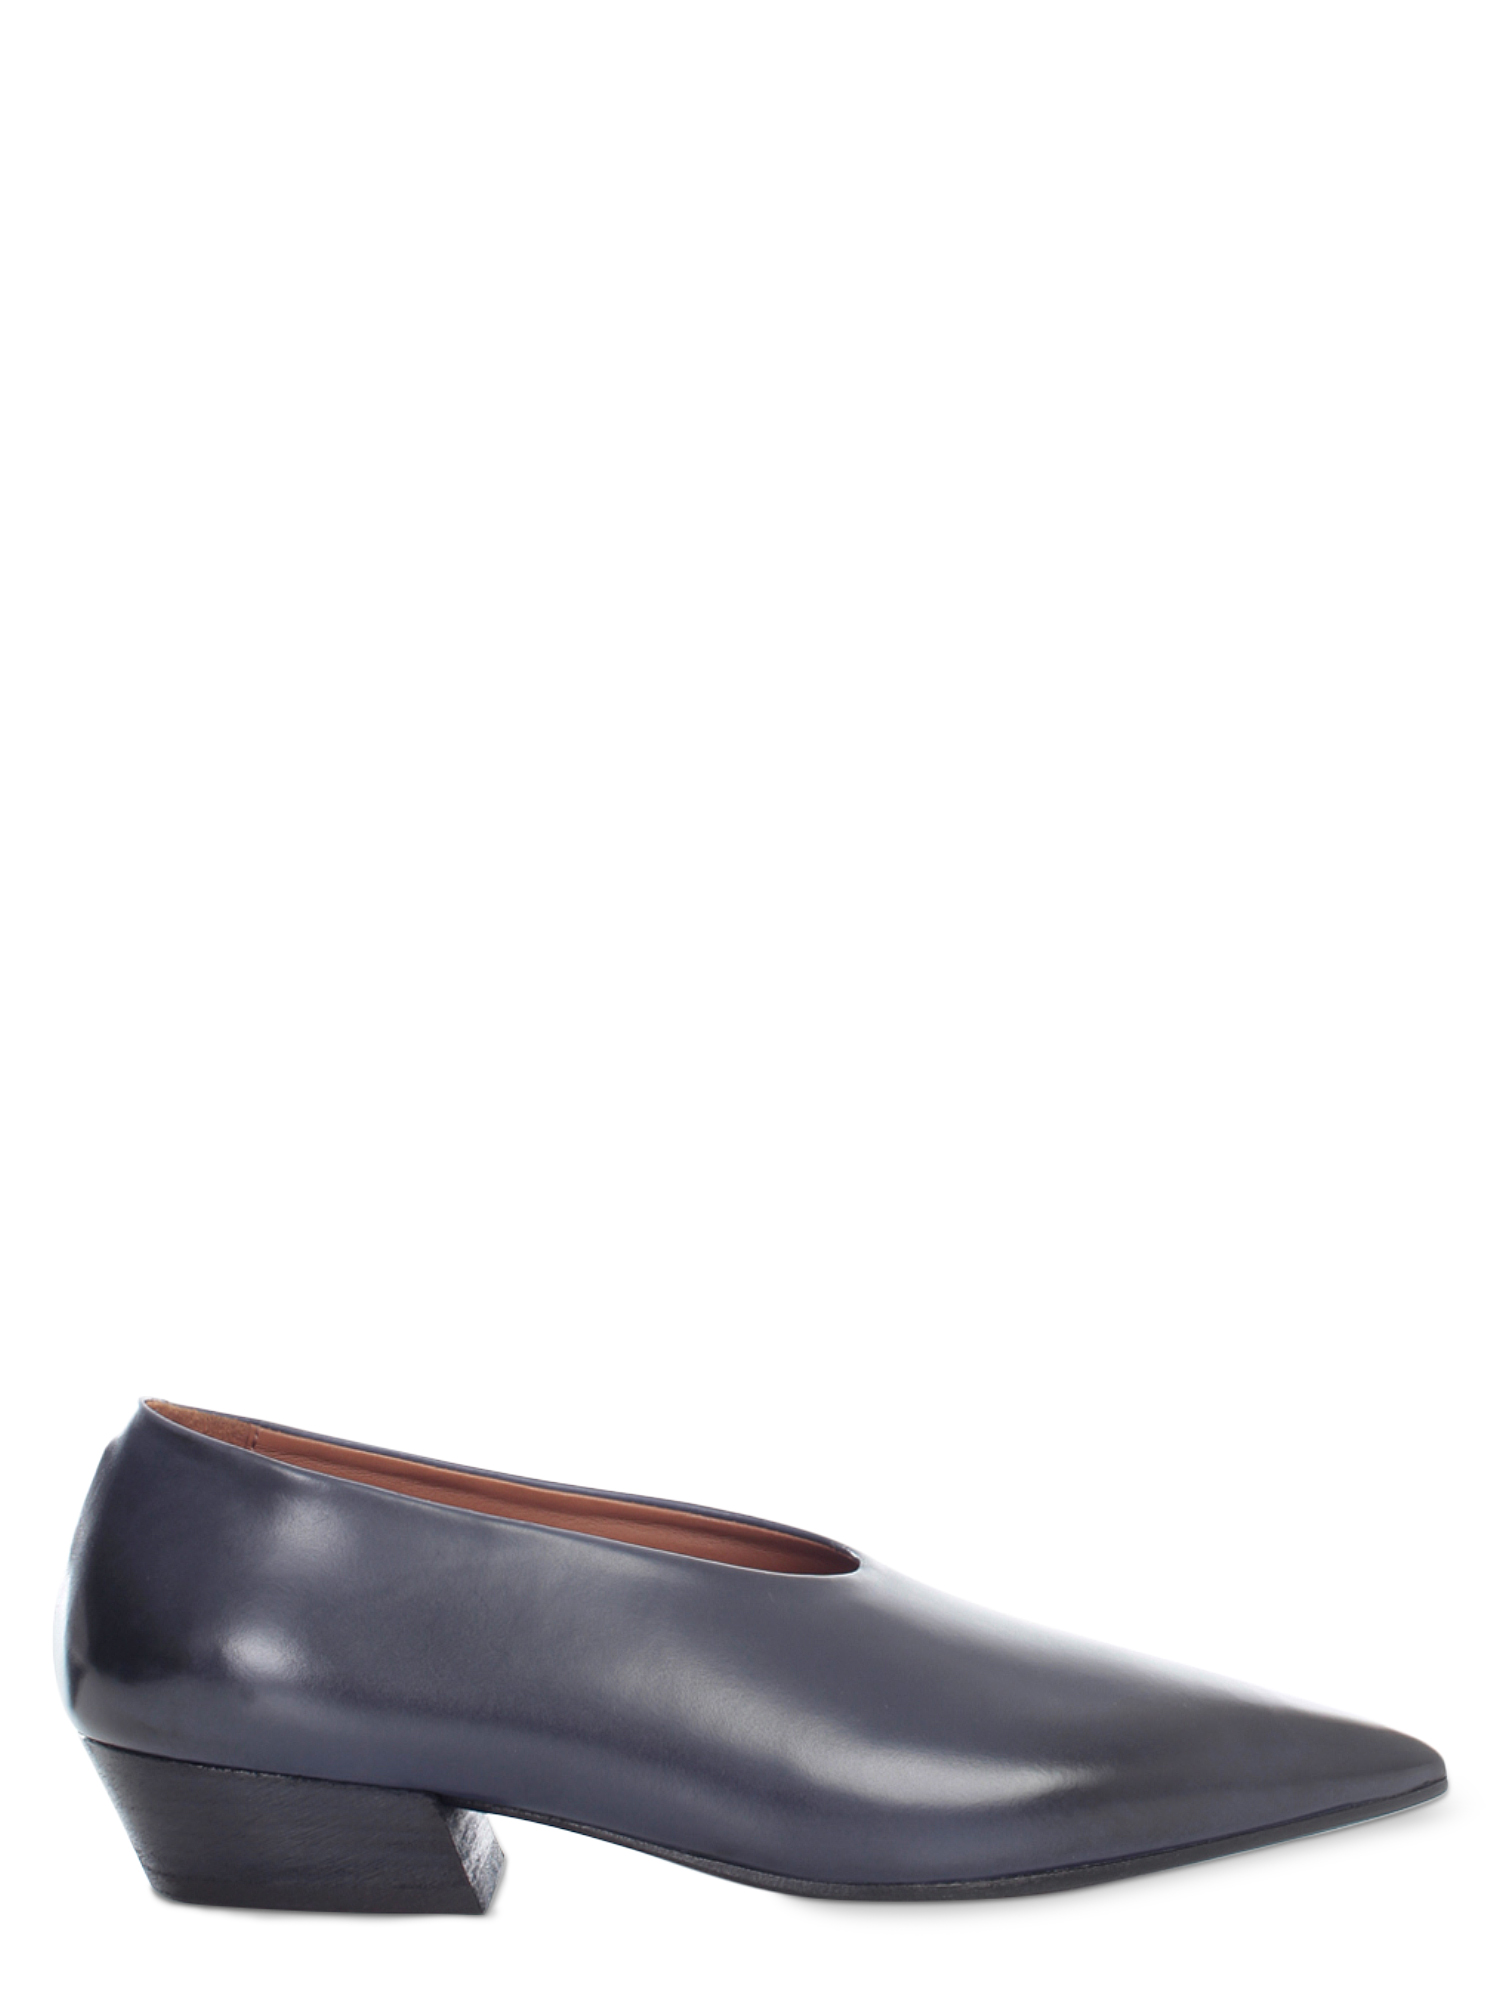 Marsell Femme Mules Navy Leather